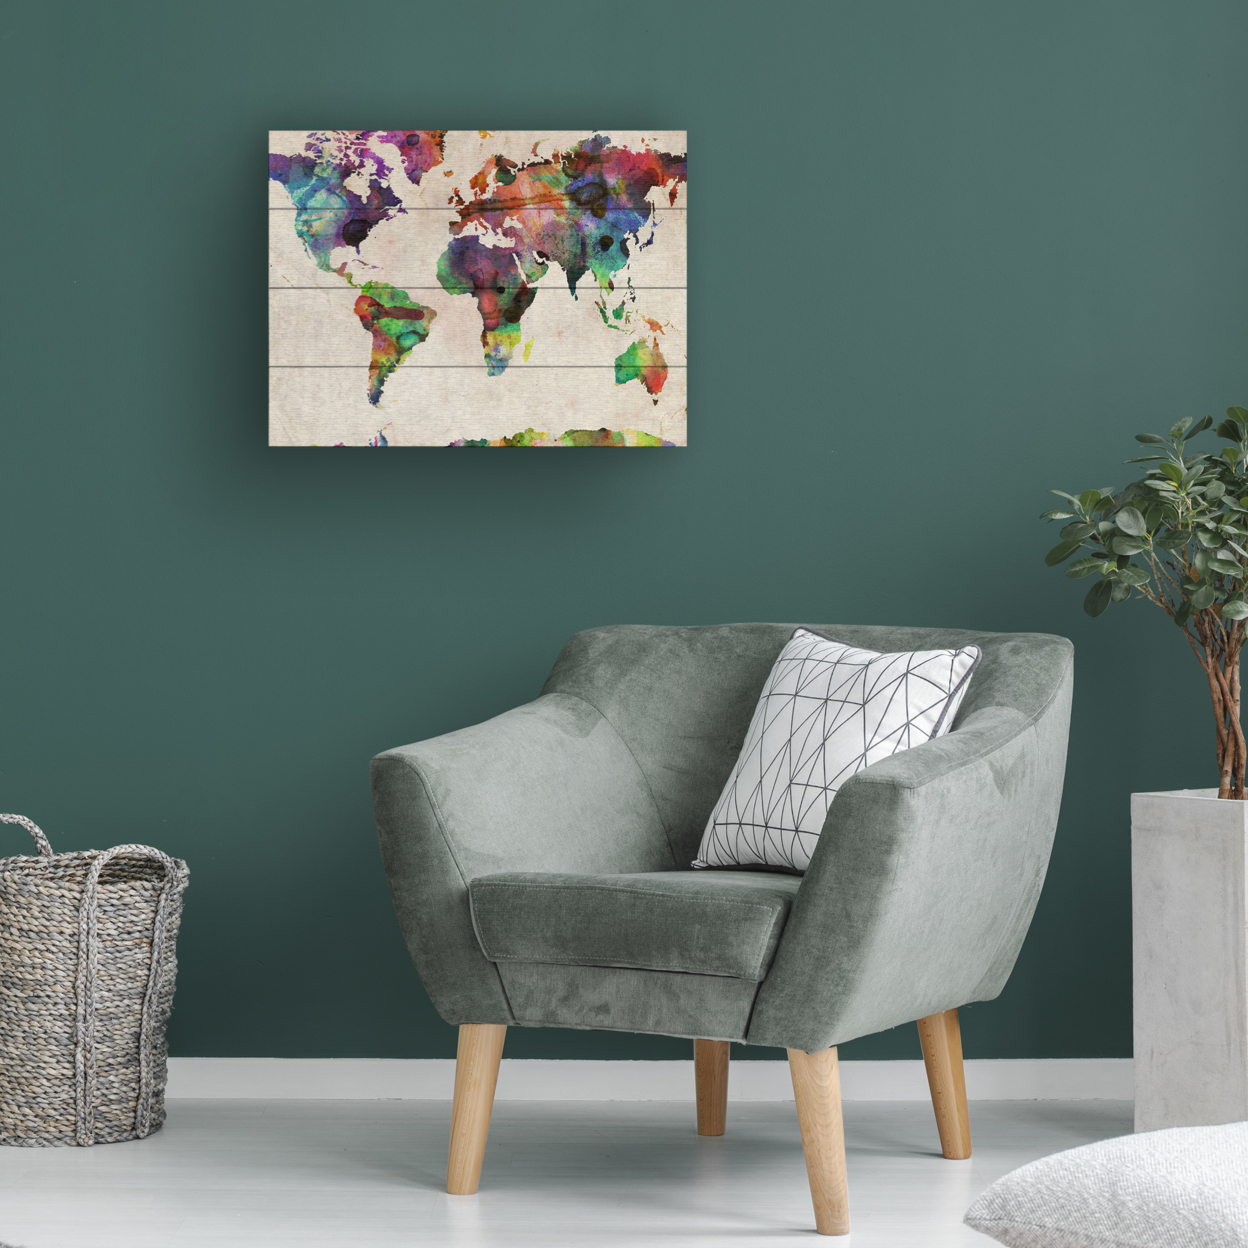 Wall Art 12 X 16 Inches Titled Urban Watercolor World Map Ready To Hang Printed On Wooden Planks